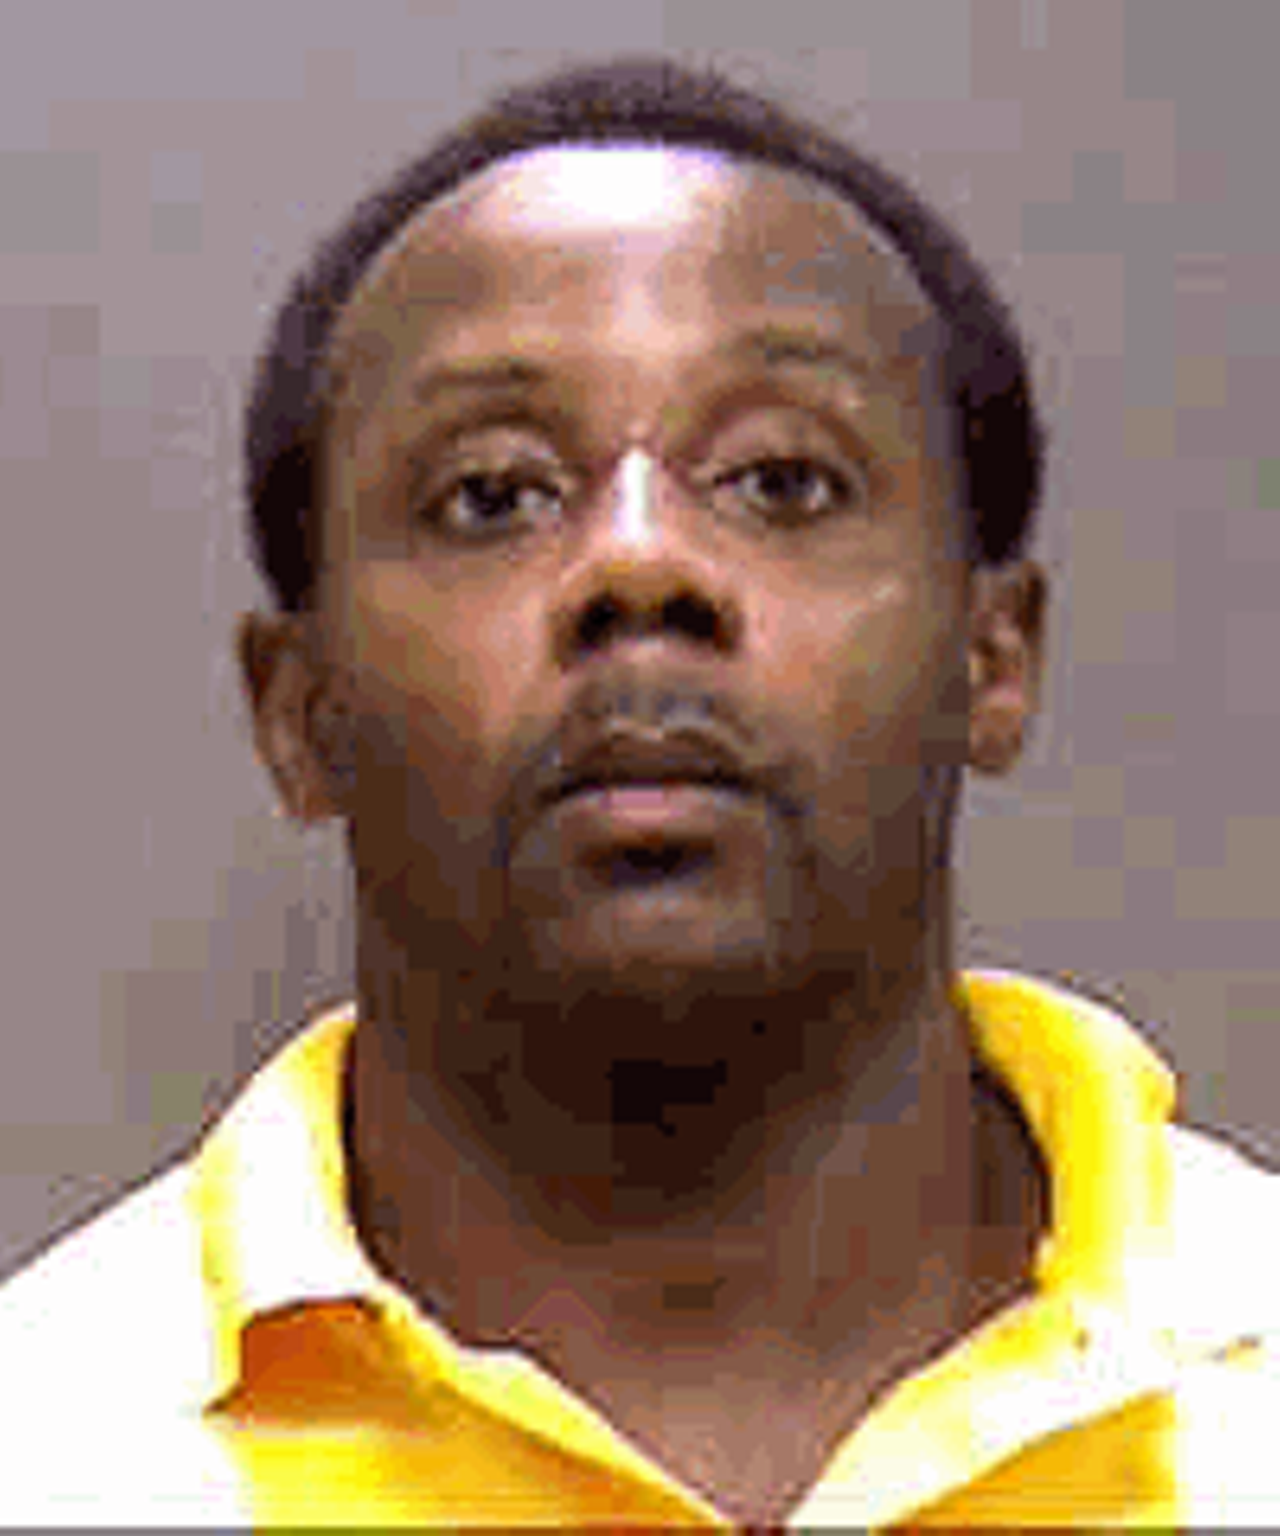 17. Cedrick Mitchell
A 39-year-old man faces a disciplinary hearing and possible suspension from the Burglary & Stick-Up Man's Union for violating its professional code of conduct during a robbery in Bradenton, Florida. 
Just after midnight, Cedrick Mitchell burst into a hotel room demanding pills. When the two occupants said they had none, he pulled a gun and asked for "everything you got." What they had was pepper spray. Which they used to blast Mitchell in the face. 
The savvy robber fled. Only later did he realize that he'd dropped his gun in the room. A forlorn Mitchell was forced to return to the hotel, where he begged his former victims to sell him back the weapon for $40. At which point he was pepper-sprayed again.